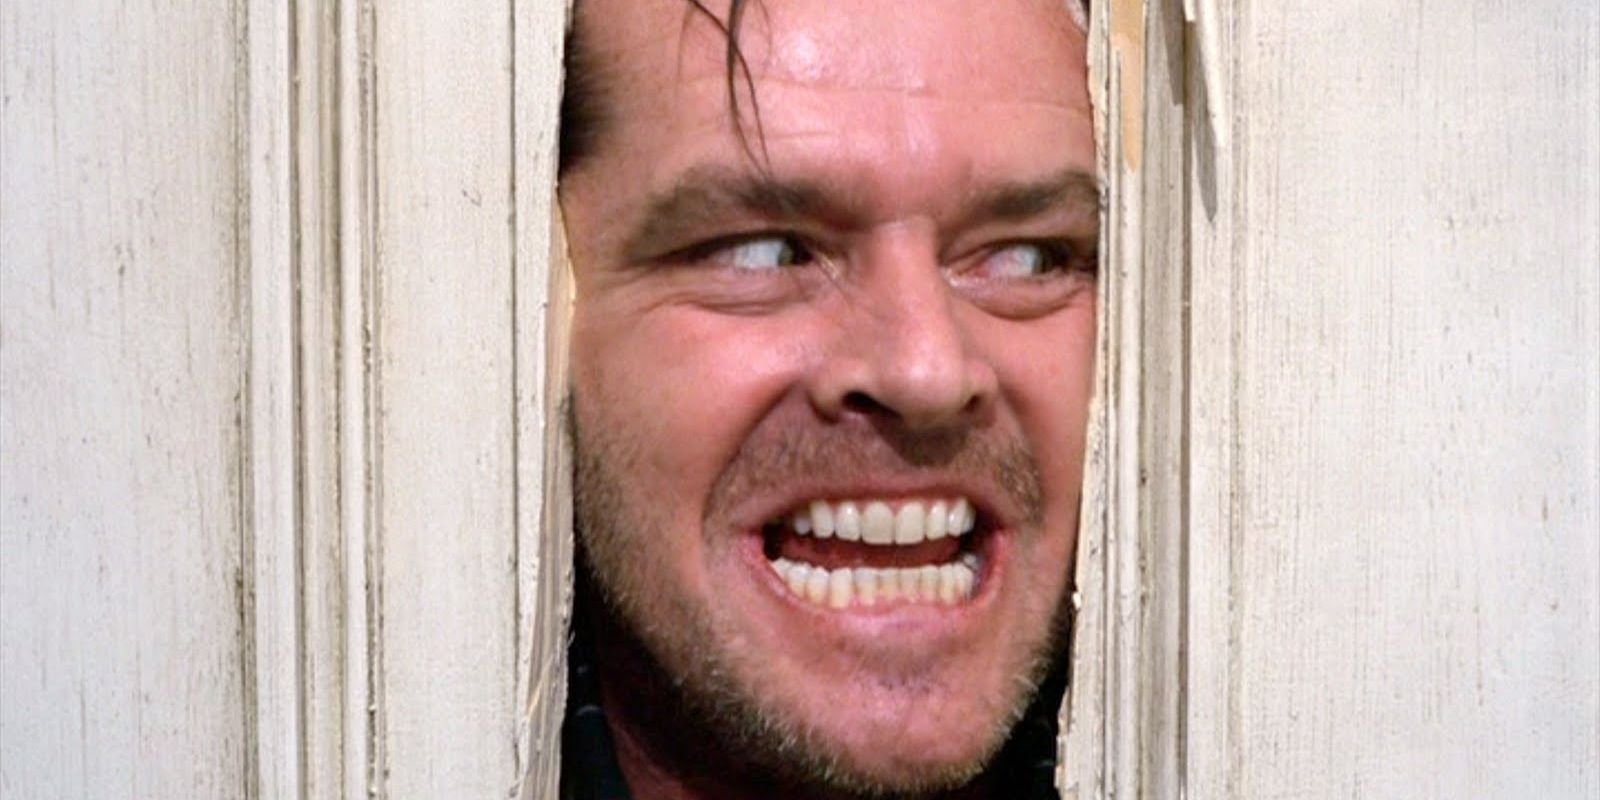 Jack Torrance sticks his face through a hole in the door during The Shining